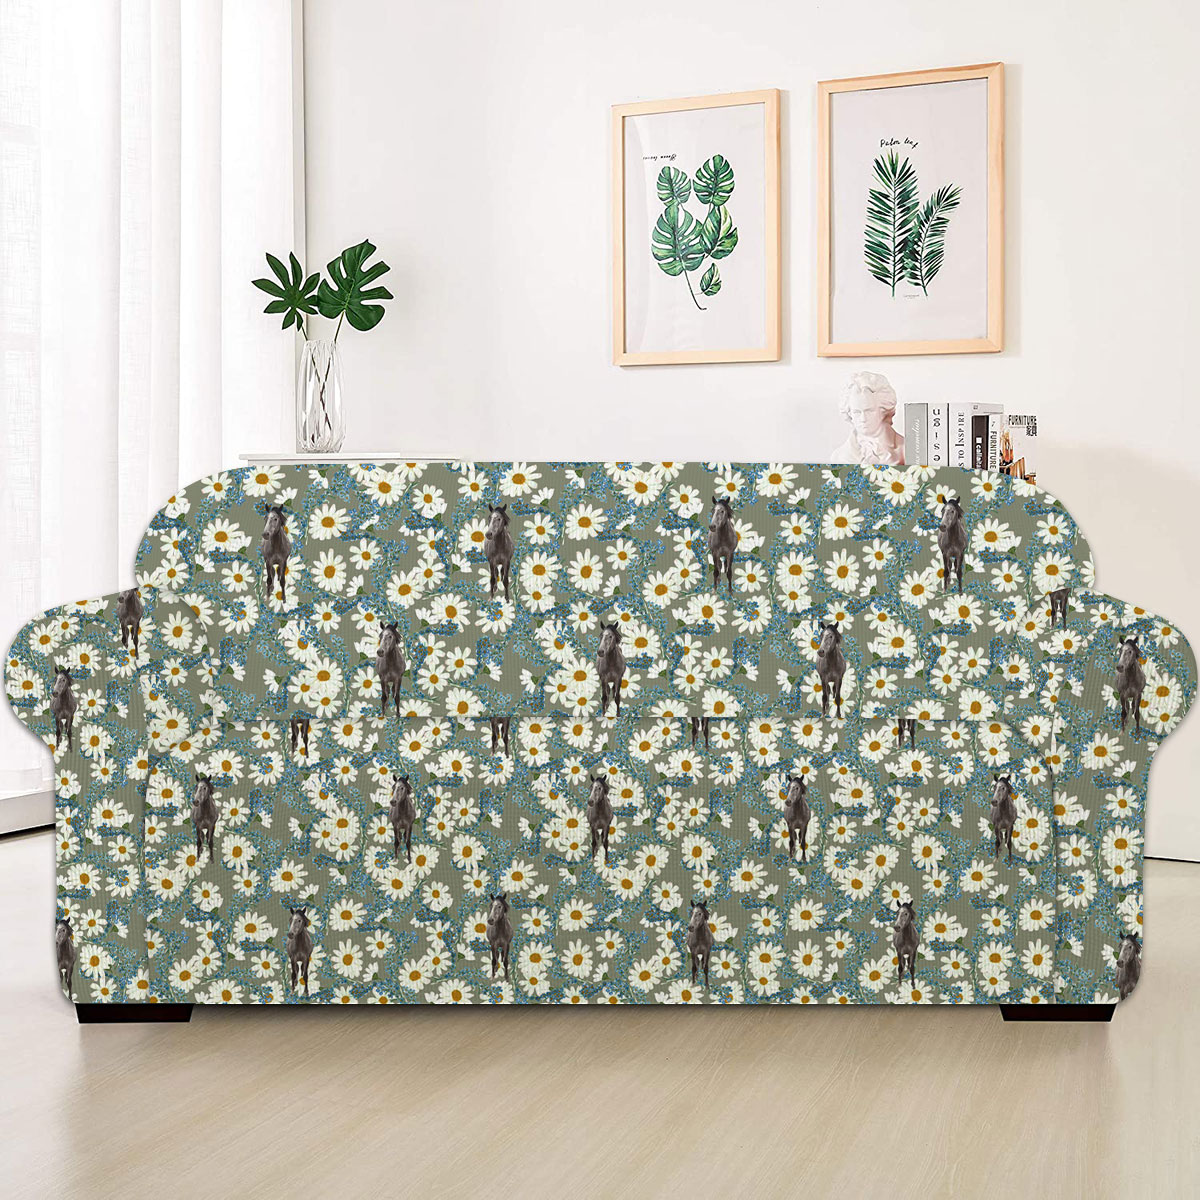 Horse Camomilles Flower Grey Pattern Sofa Cover